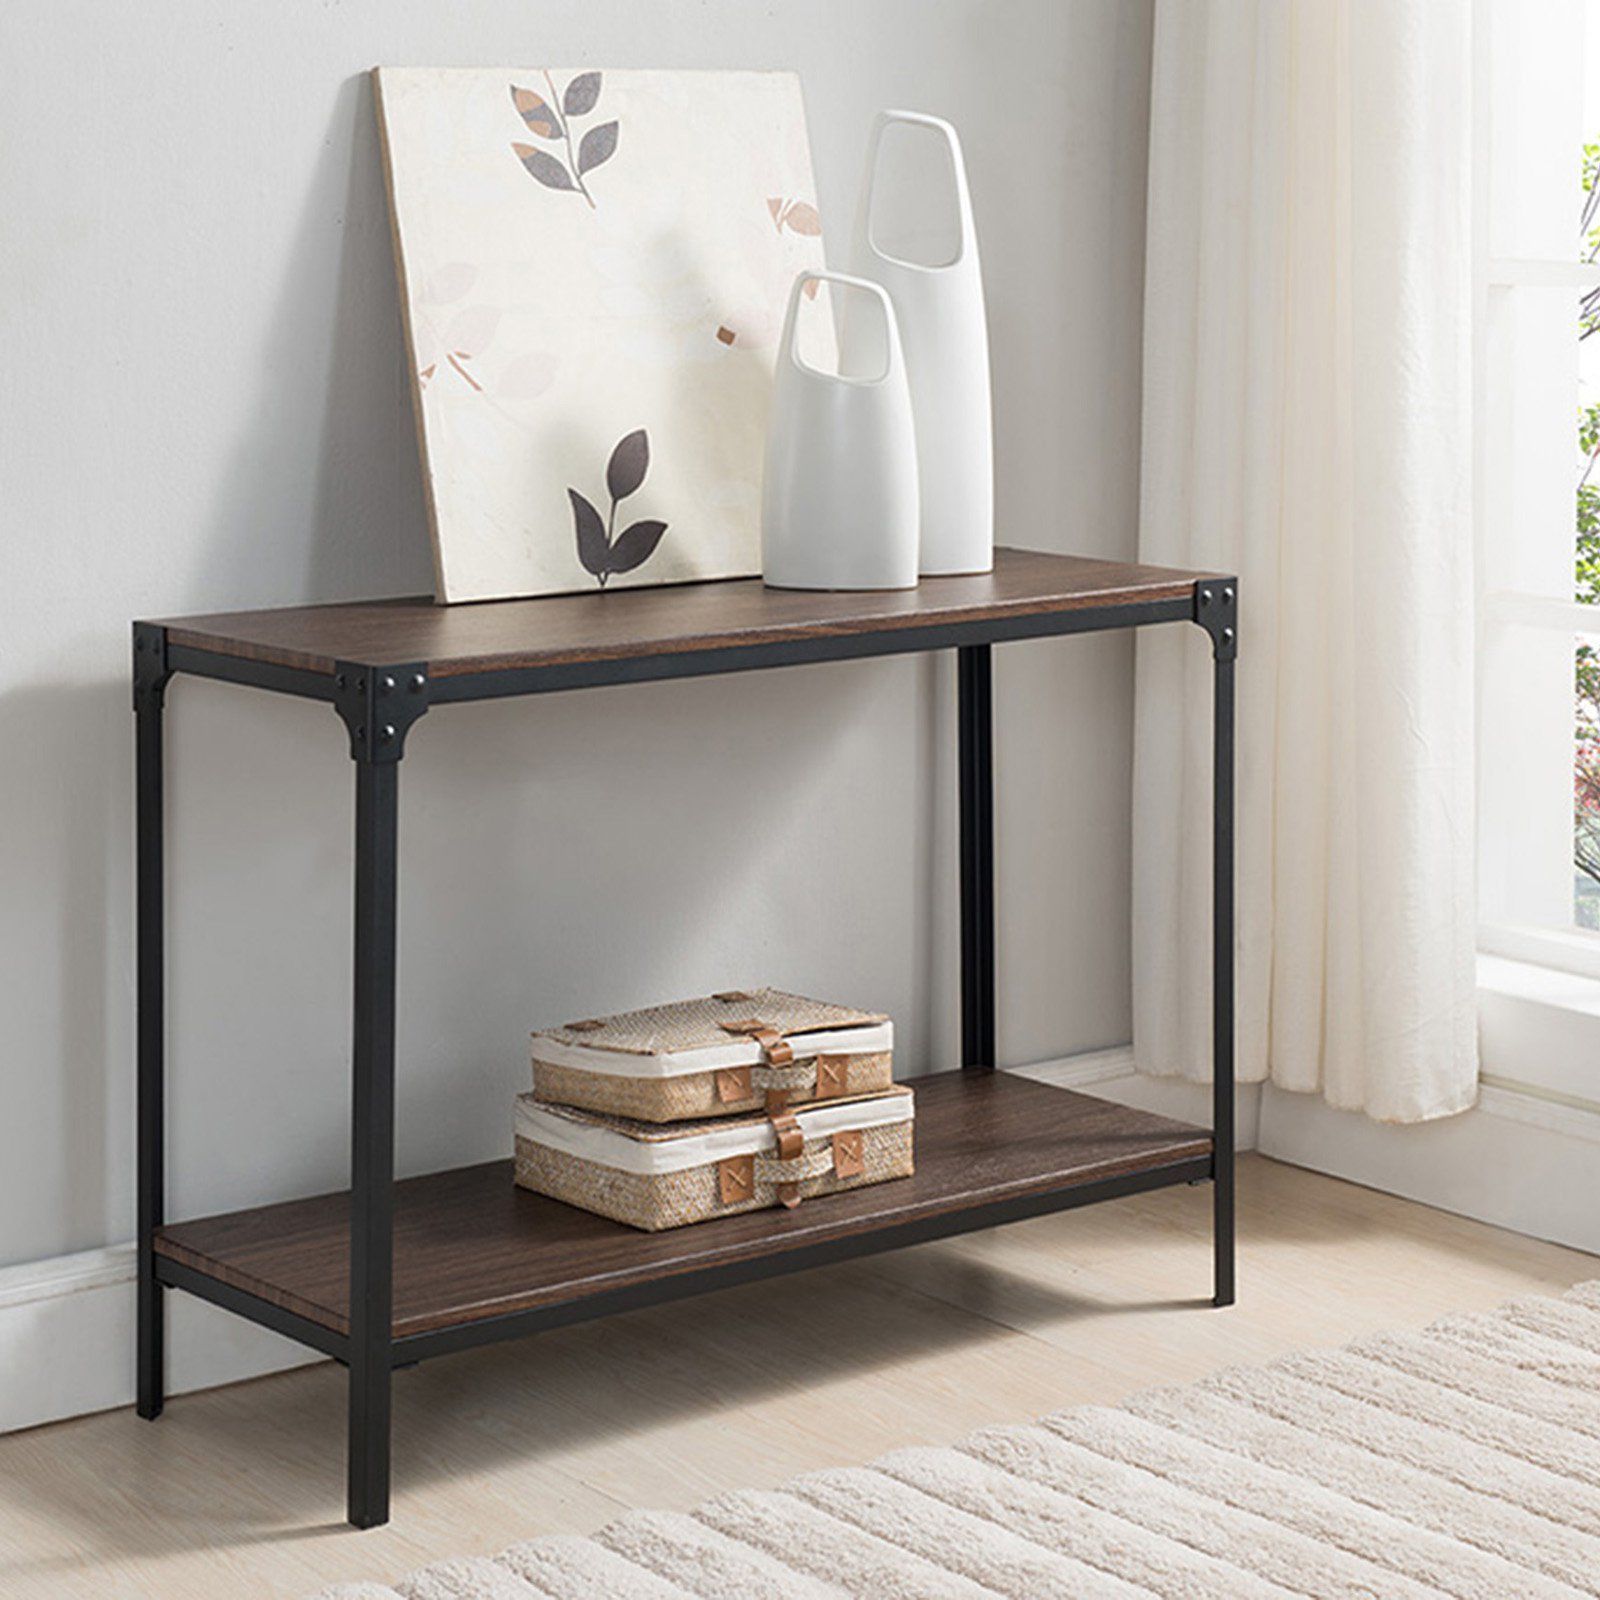 K&b Furniture Black Metal And Walnut Console Table | Metal Console Intended For Black Wood Storage Console Tables (View 6 of 20)